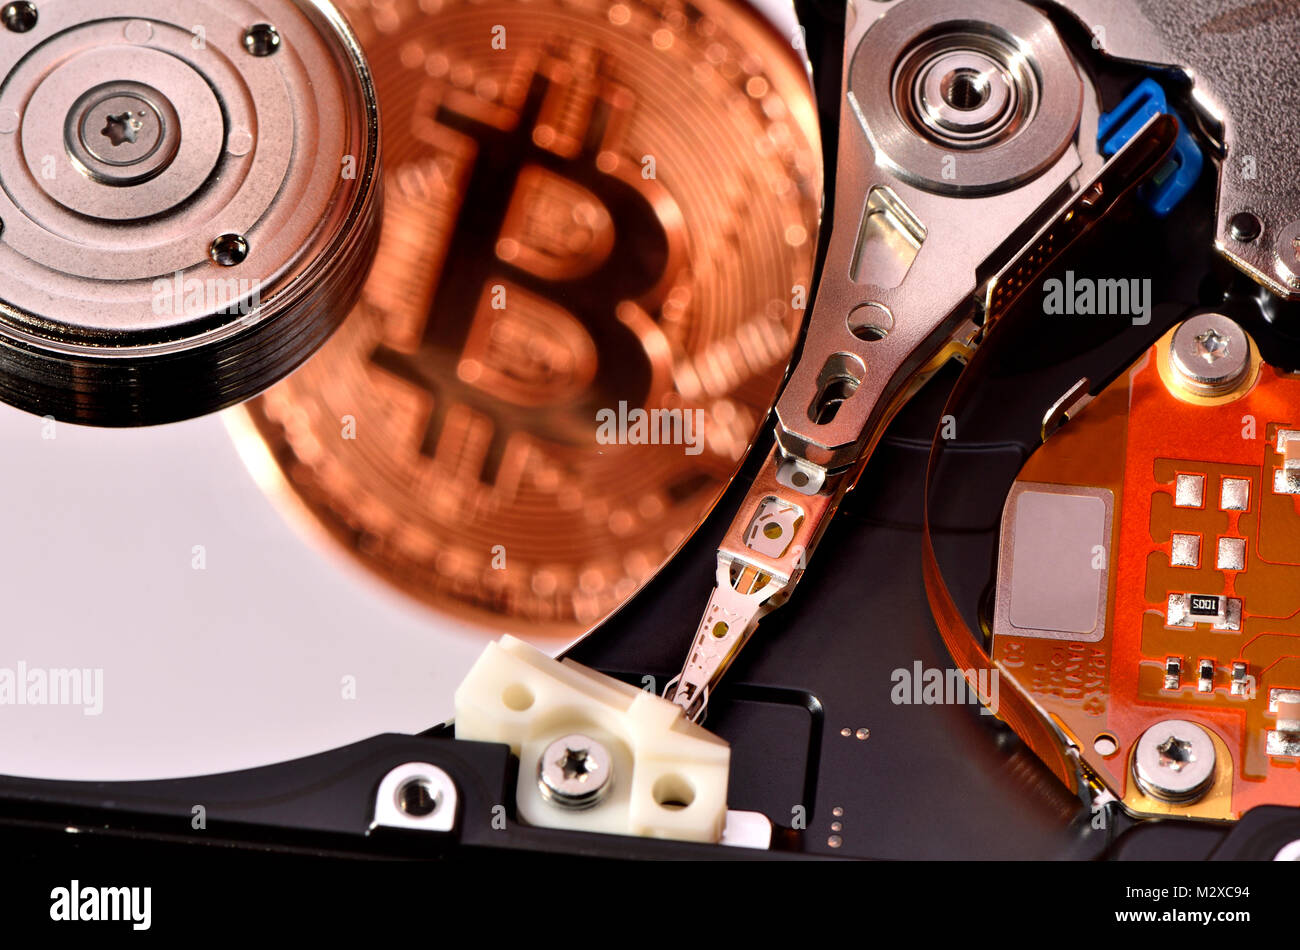 Bitcoin cryptocurrency / payment system (Copper Bitcoin Commemorative Round .999 bullion) Electronic currency - computer hard drive; Stock Photo